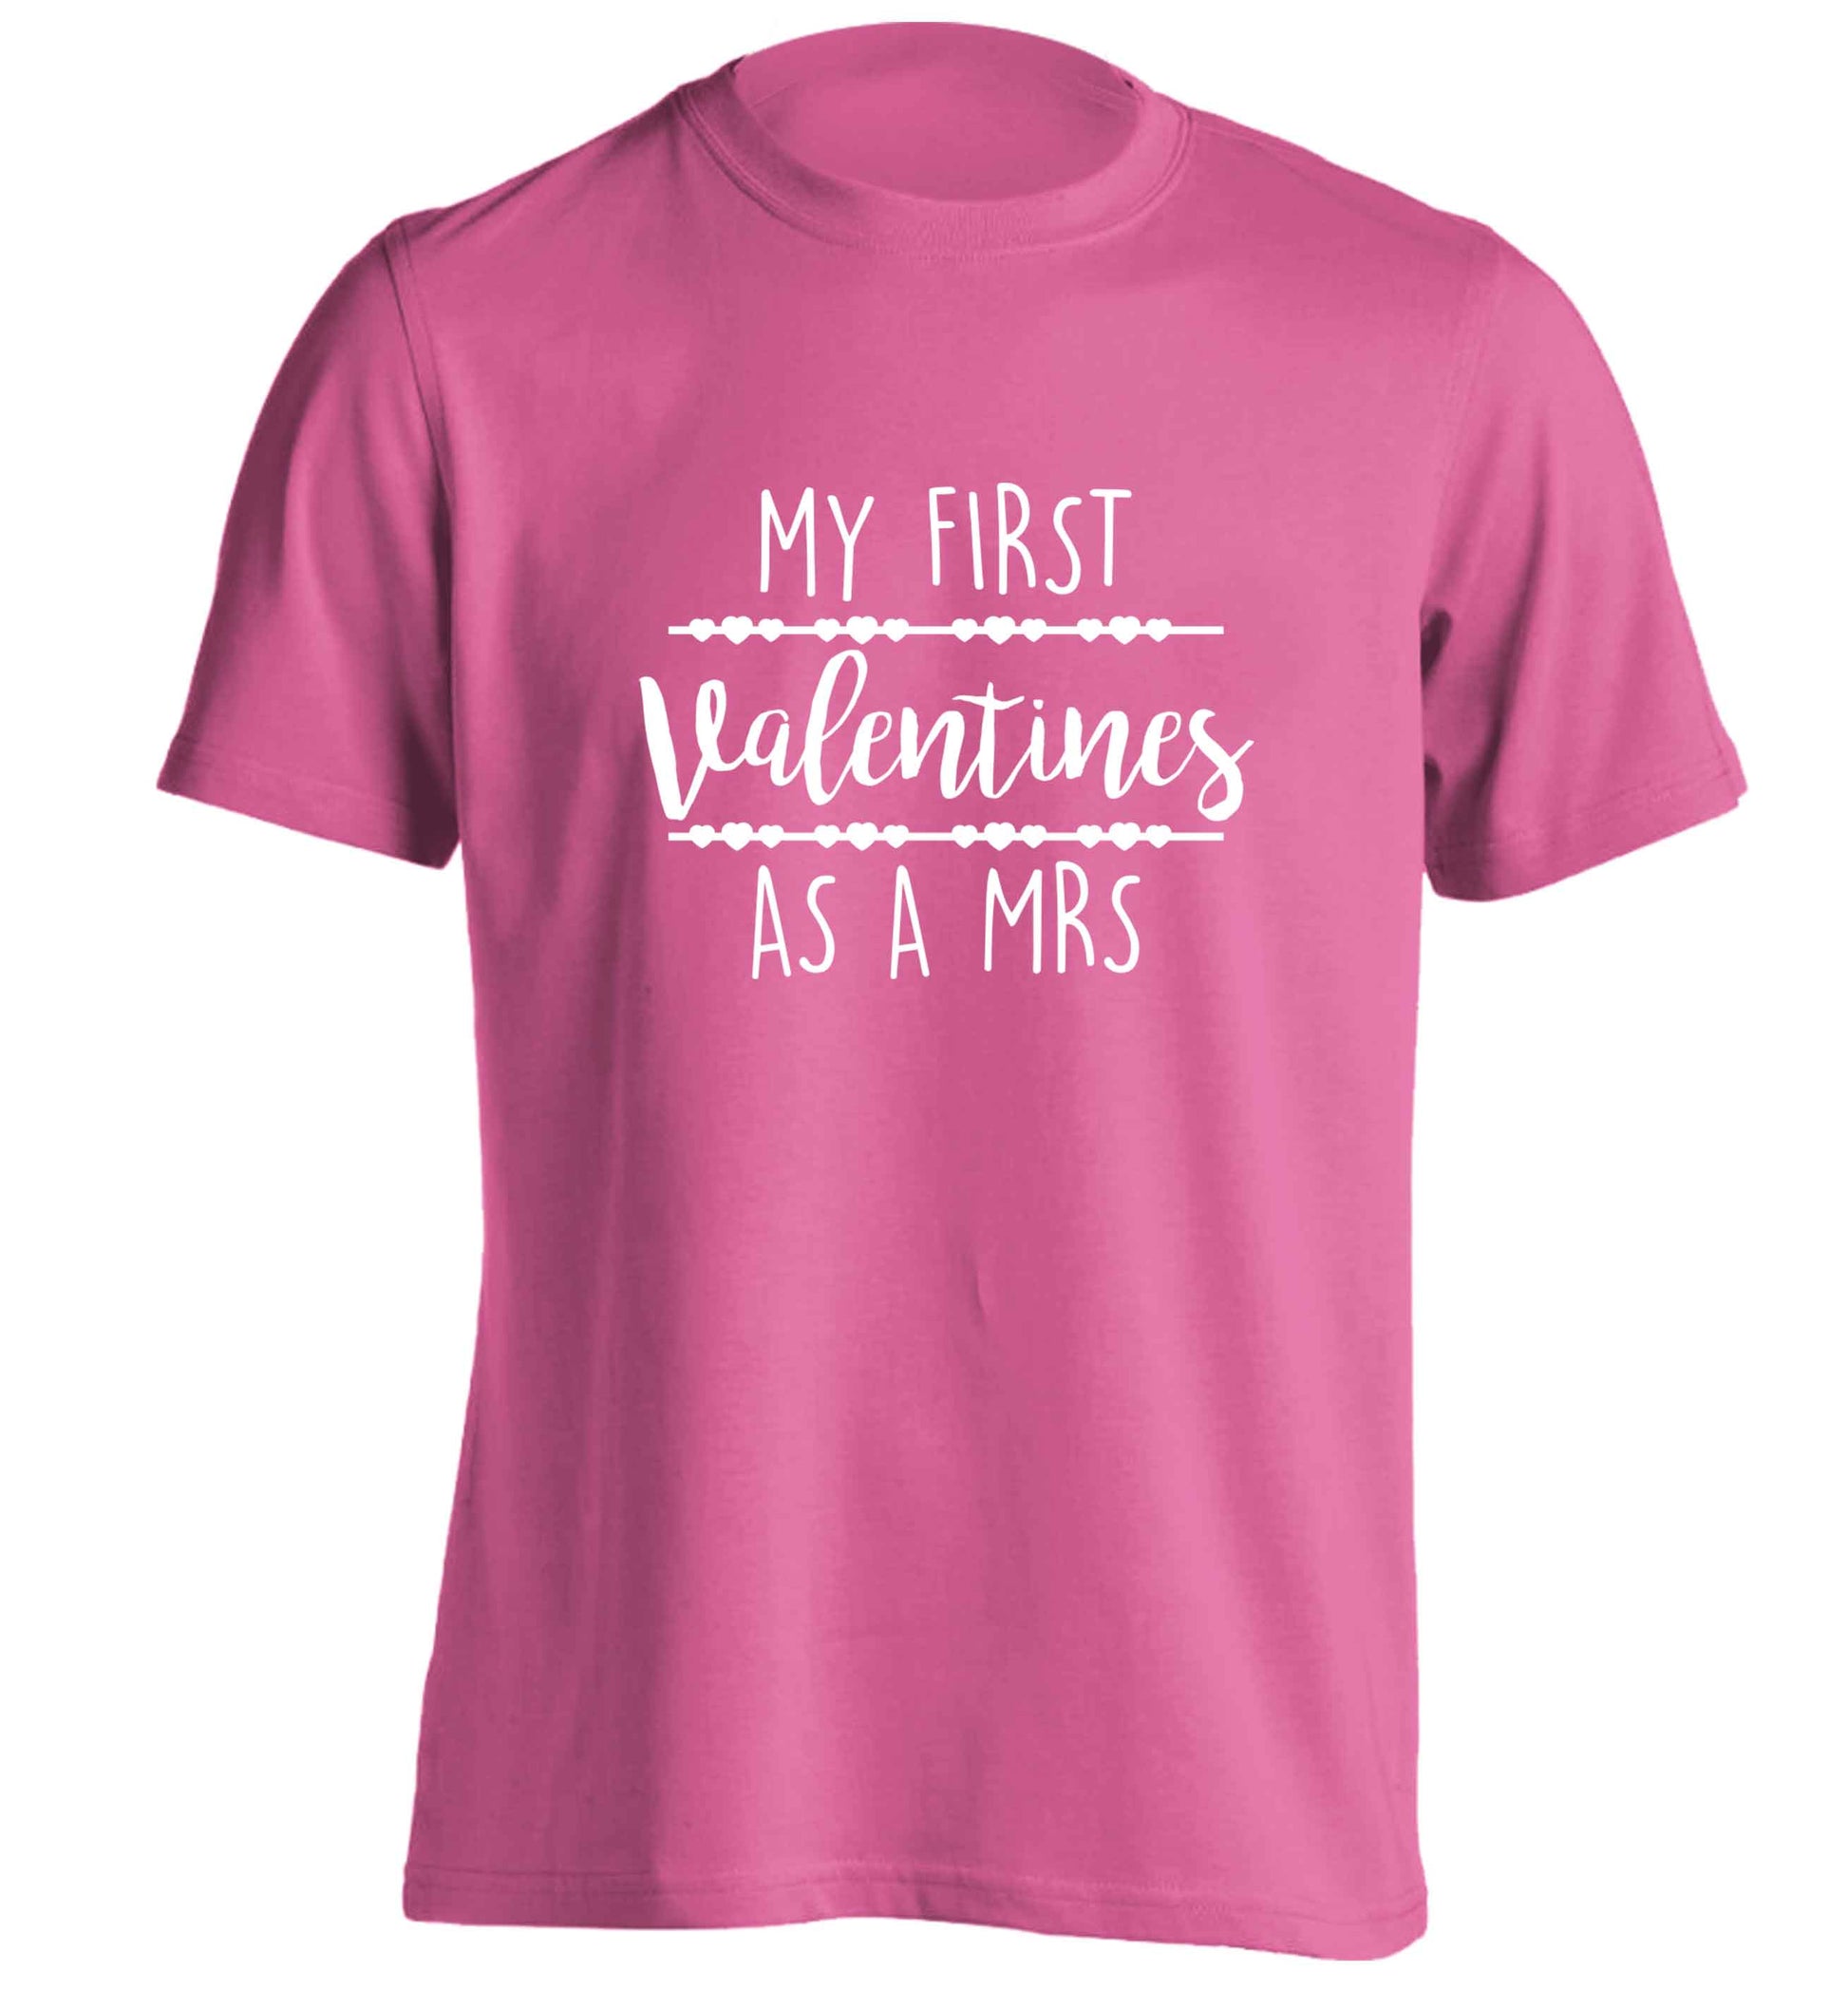 My first valentines as a Mrs adults unisex pink Tshirt 2XL